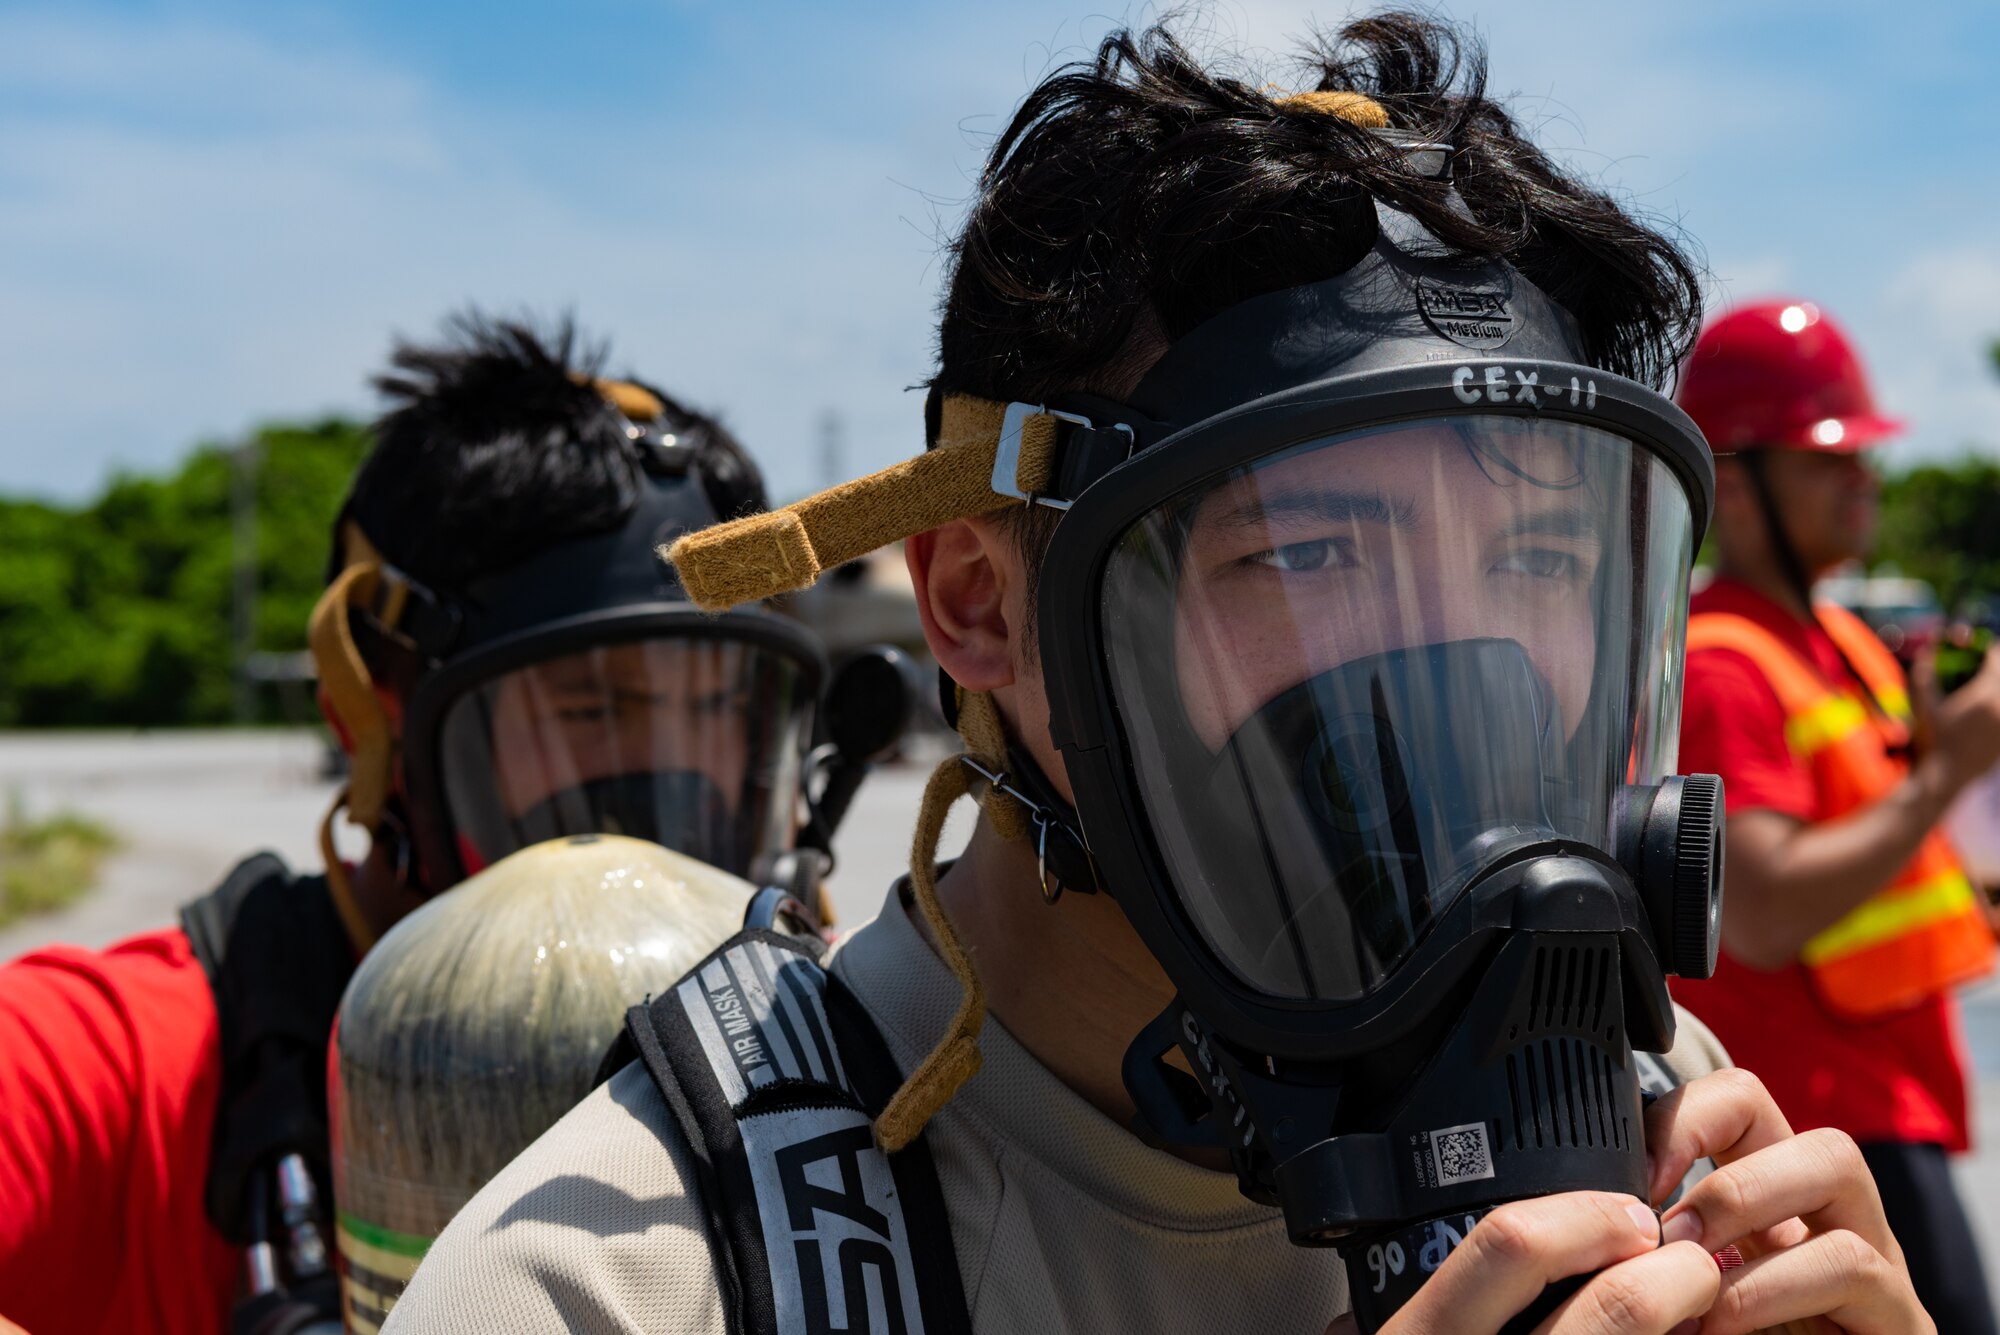 U.S. Air Force Senior Airman Sean Kientz, emergency management journeyman assigned to the 18th Civil Engineer Squadron, tests a self-contained breathing apparatus during a hazardous material training exercise July 11, 2019, on Kadena Air Base, Japan. The Level A suit worn during this training provides the highest level of protection against direct and airborne chemical contact, and is often worn with a self-contained breathing apparatus. (U.S. Air Force photo by Senior Airman Cynthia Belío)